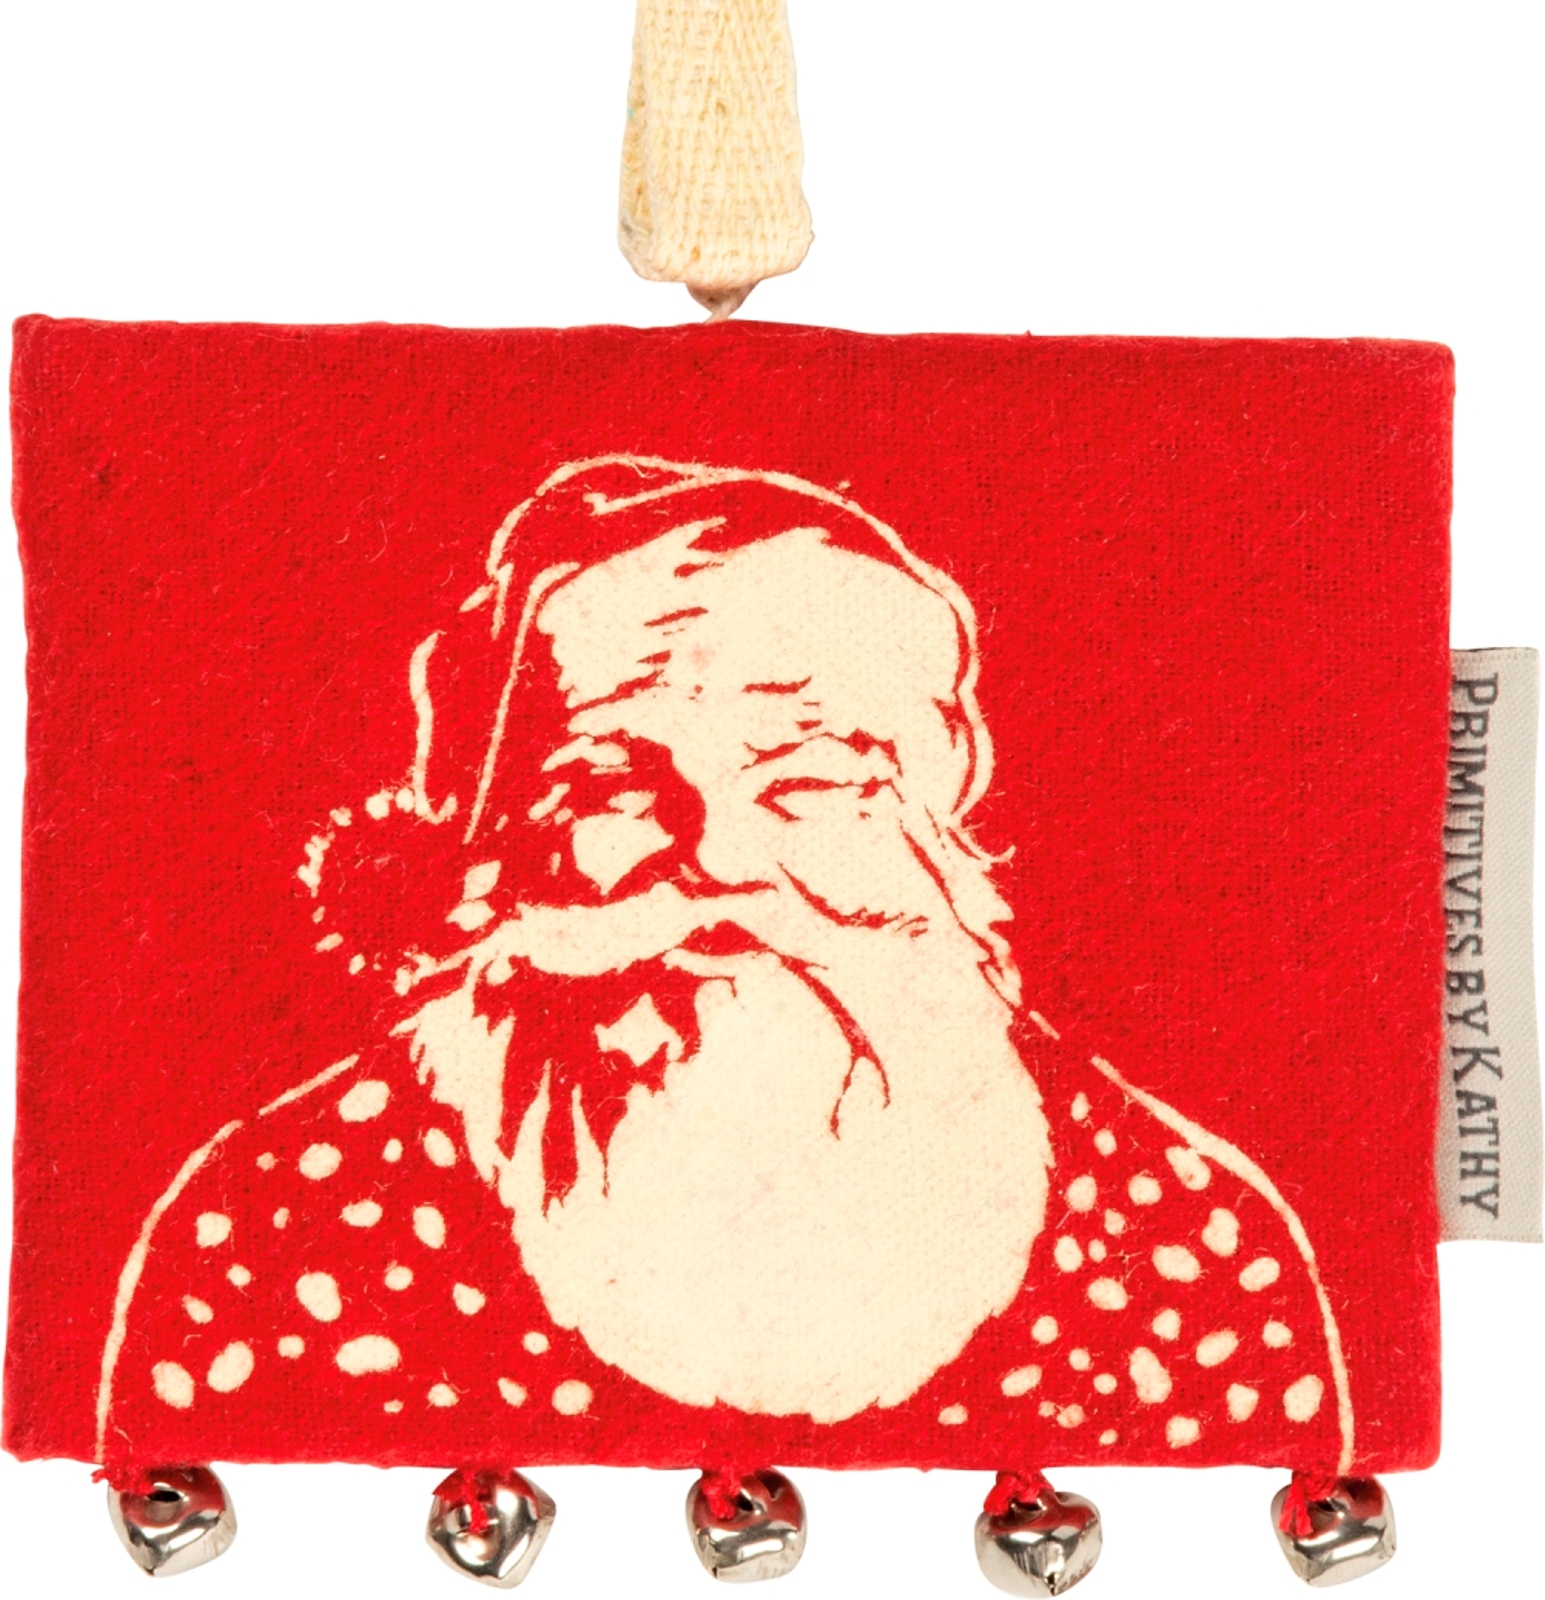 Primitives By Kathy Merry Christmas Santa Holiday Ornament Gift Card Holder Vintage Inspired